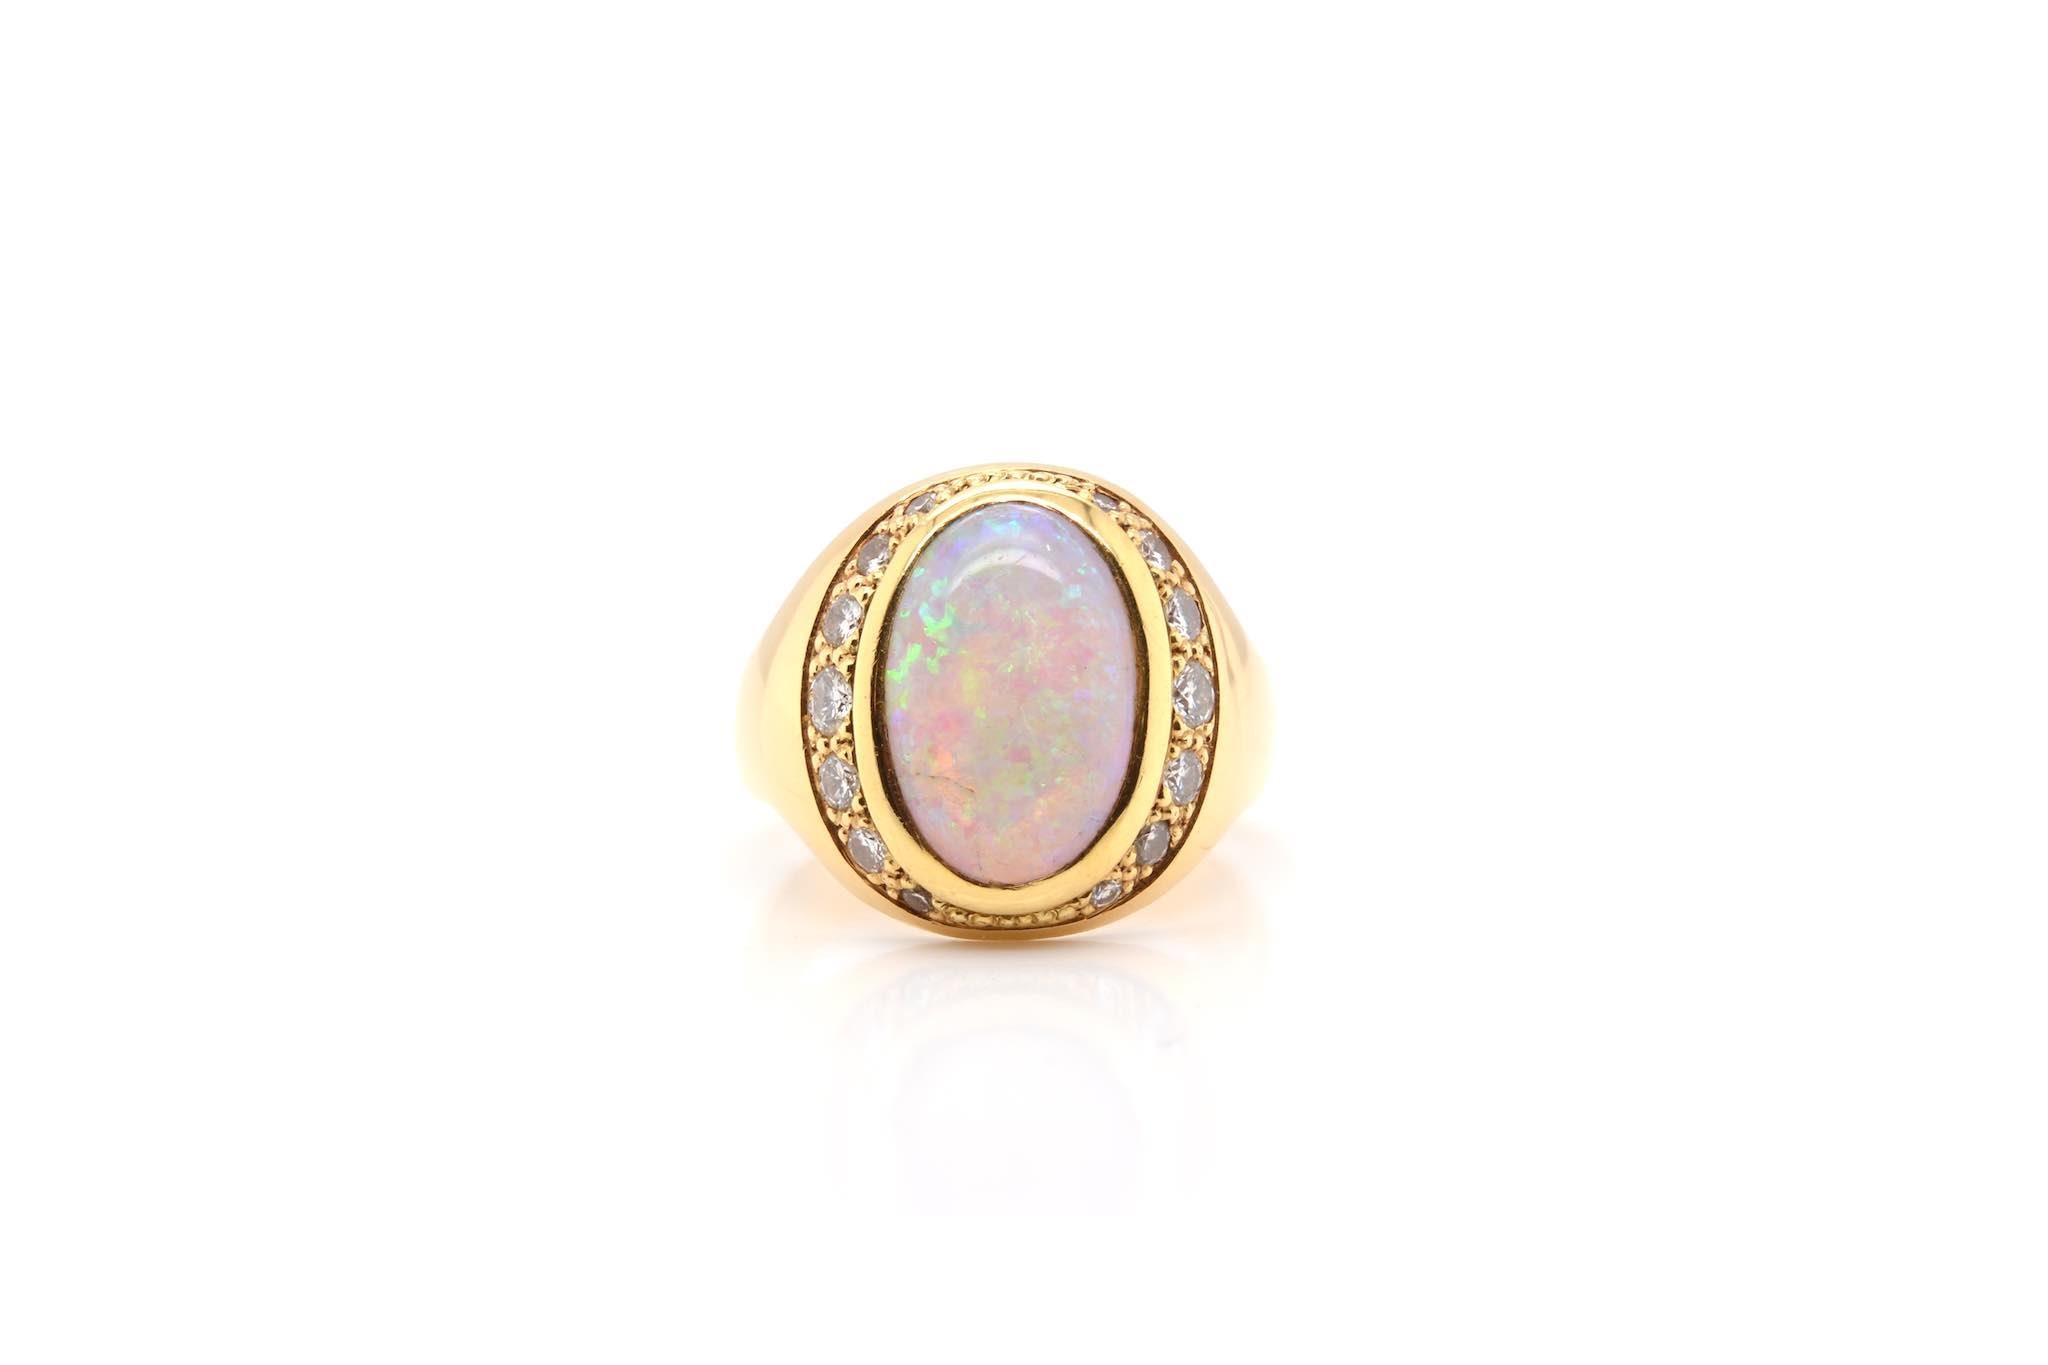 Stones: Opal and diamonds for a total weight of 0.20 carat
Material: 18k yellow gold
Dimensions: 1.8cm length on finger
Weight: 10g
Size: 57 (free sizing)
Certificate
Ref. : 24591